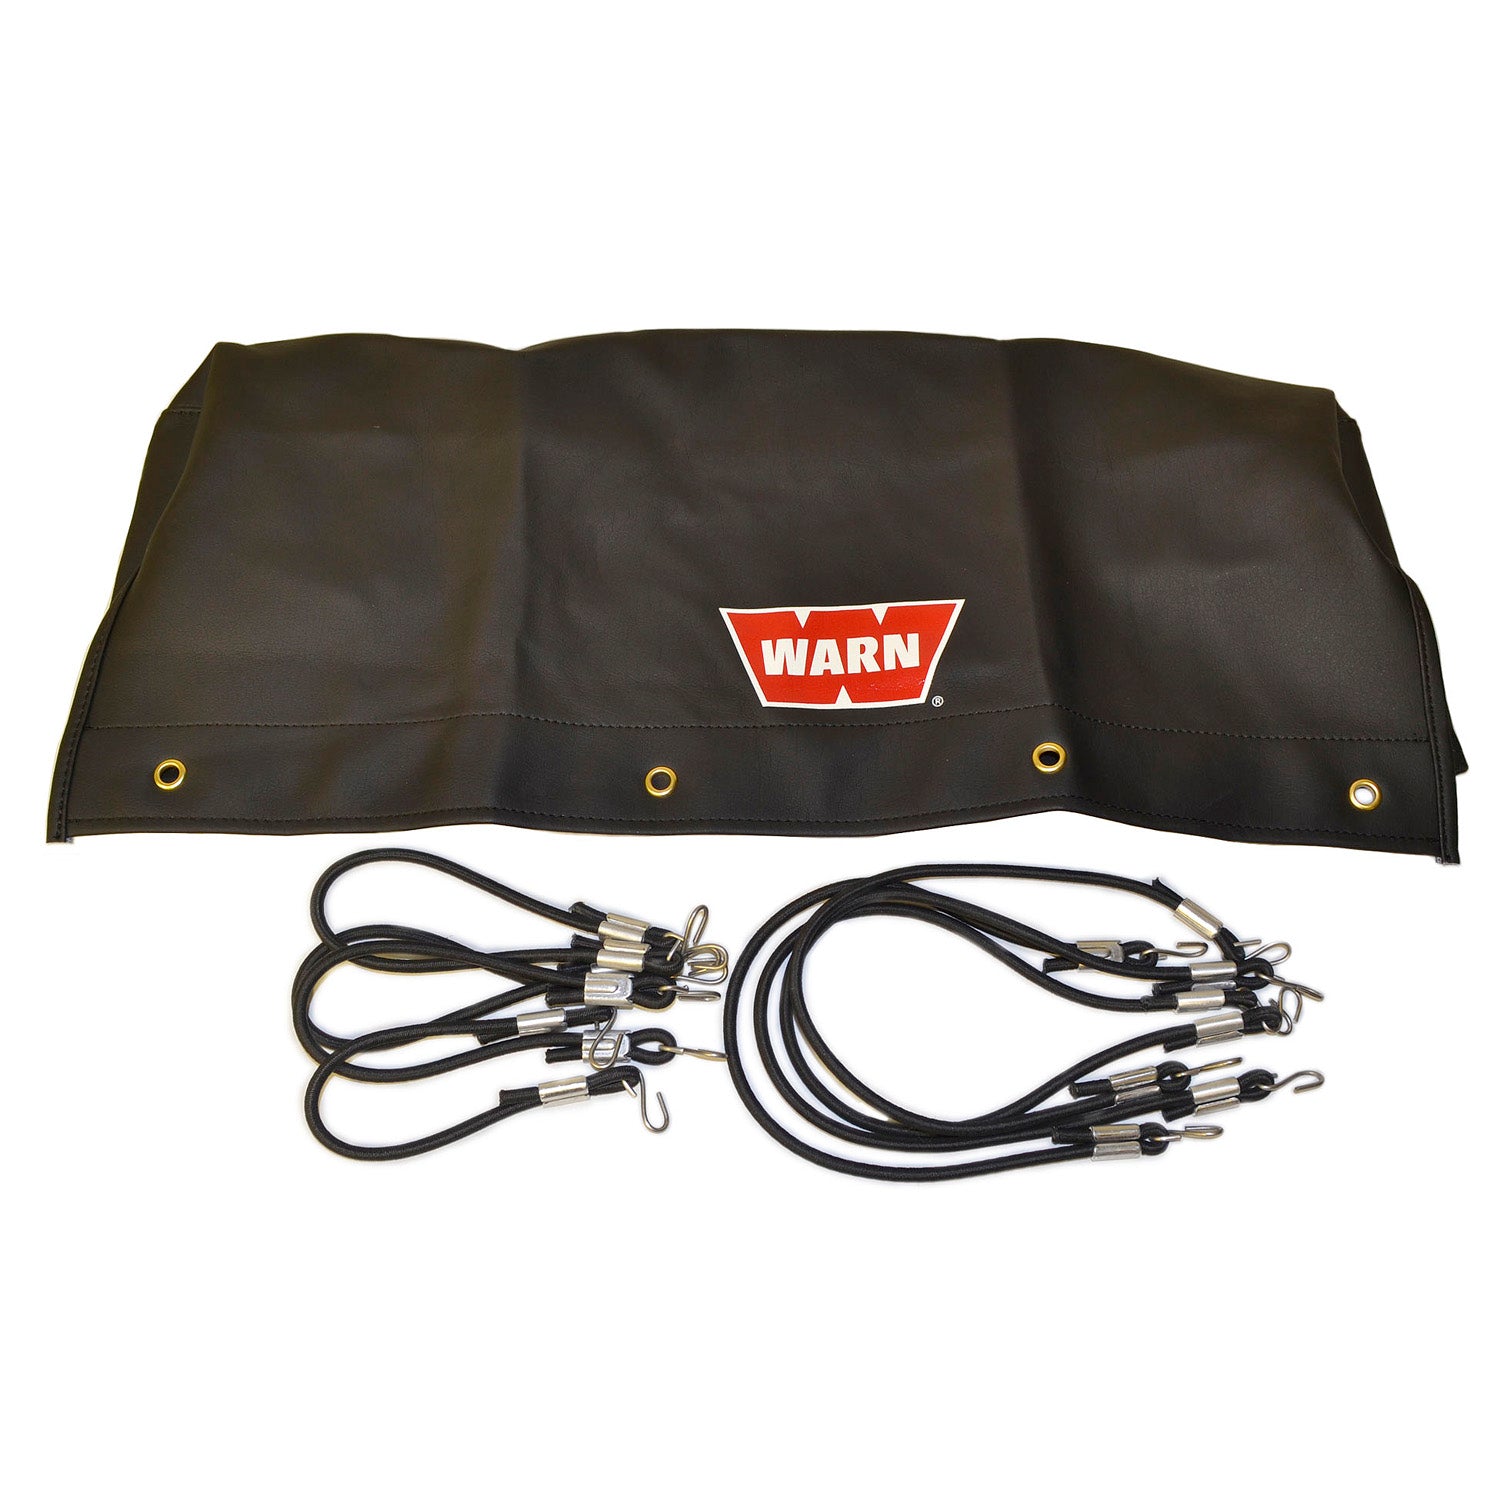 Winch Cover for 9.5TI and XD9000I